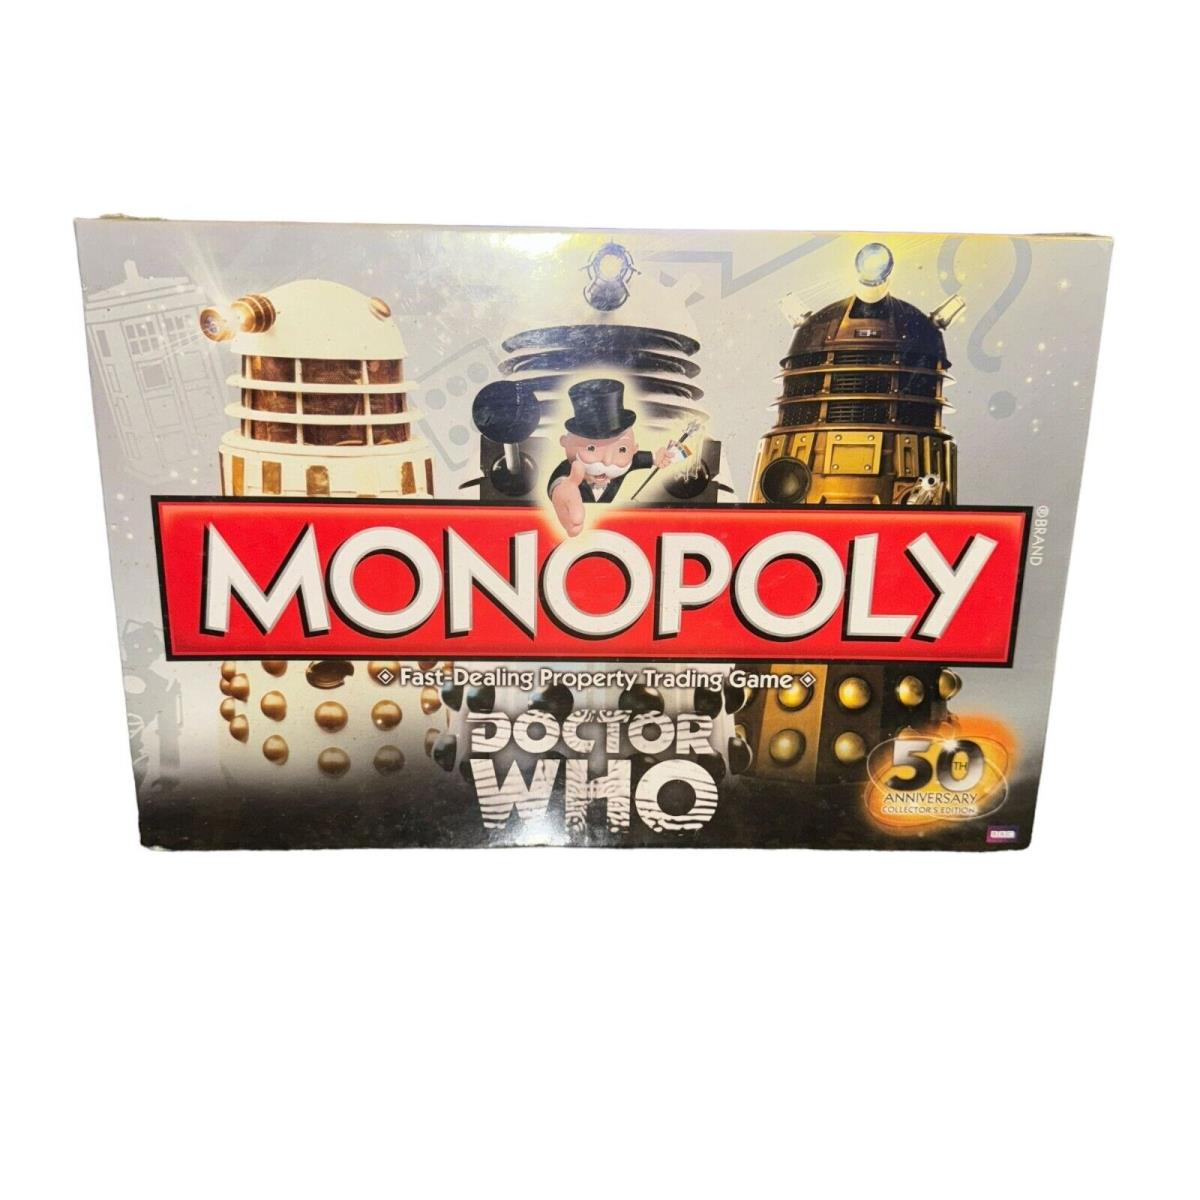 Dr Who Monopoly Board Game 50th Anniversary Collector`s Edition 2012